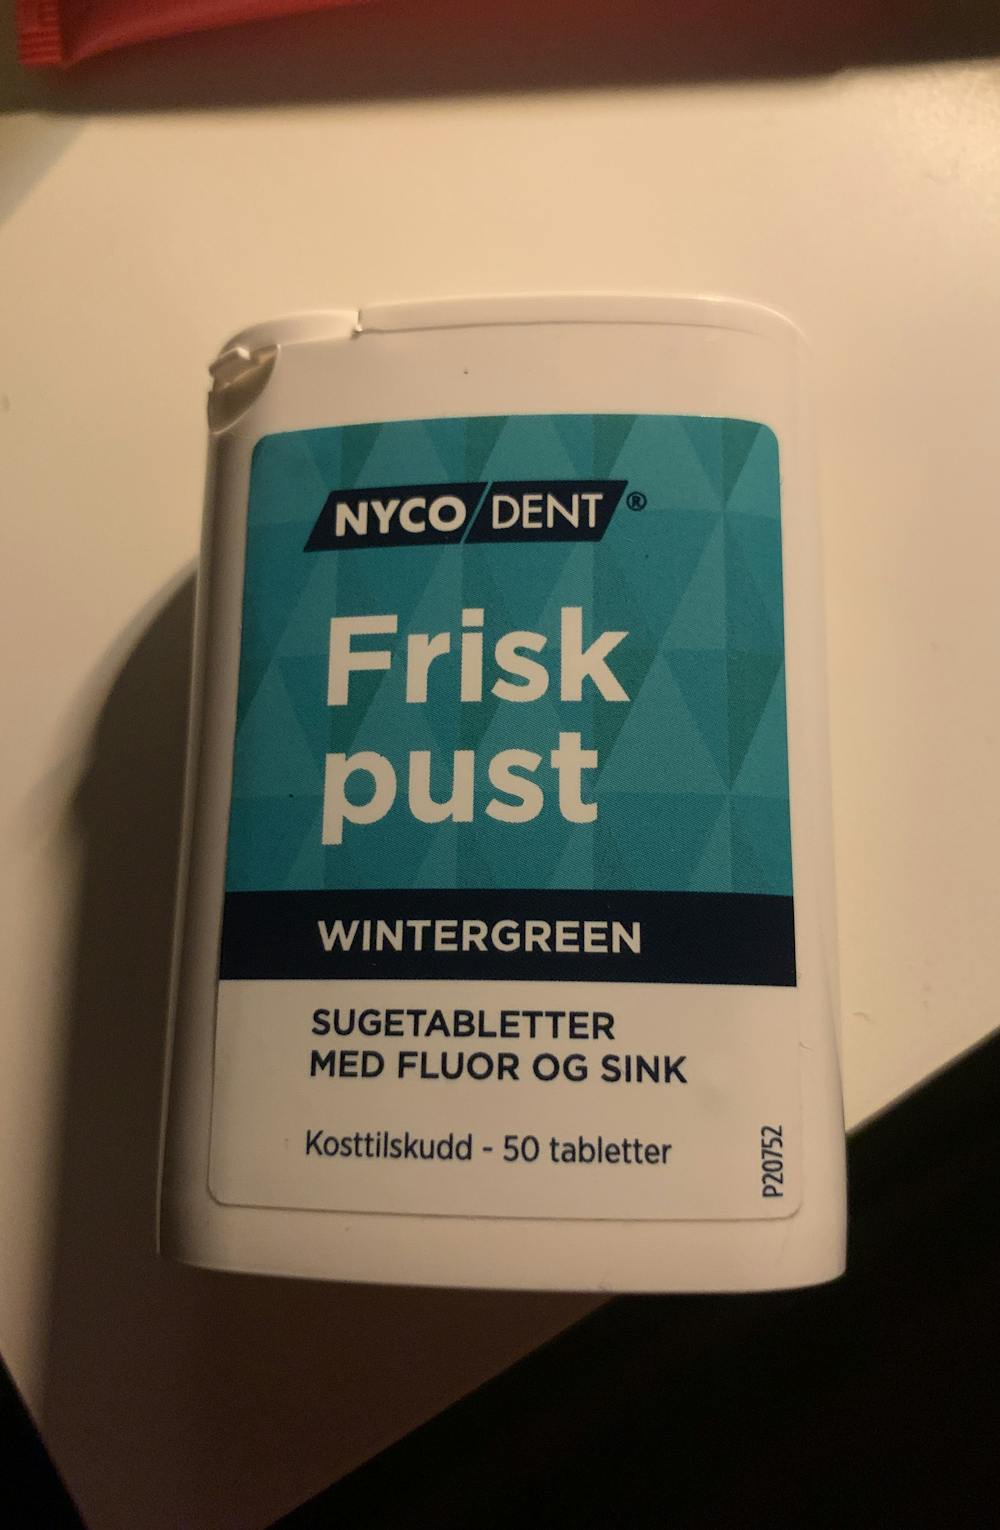 Frisk pust, Nyco dent